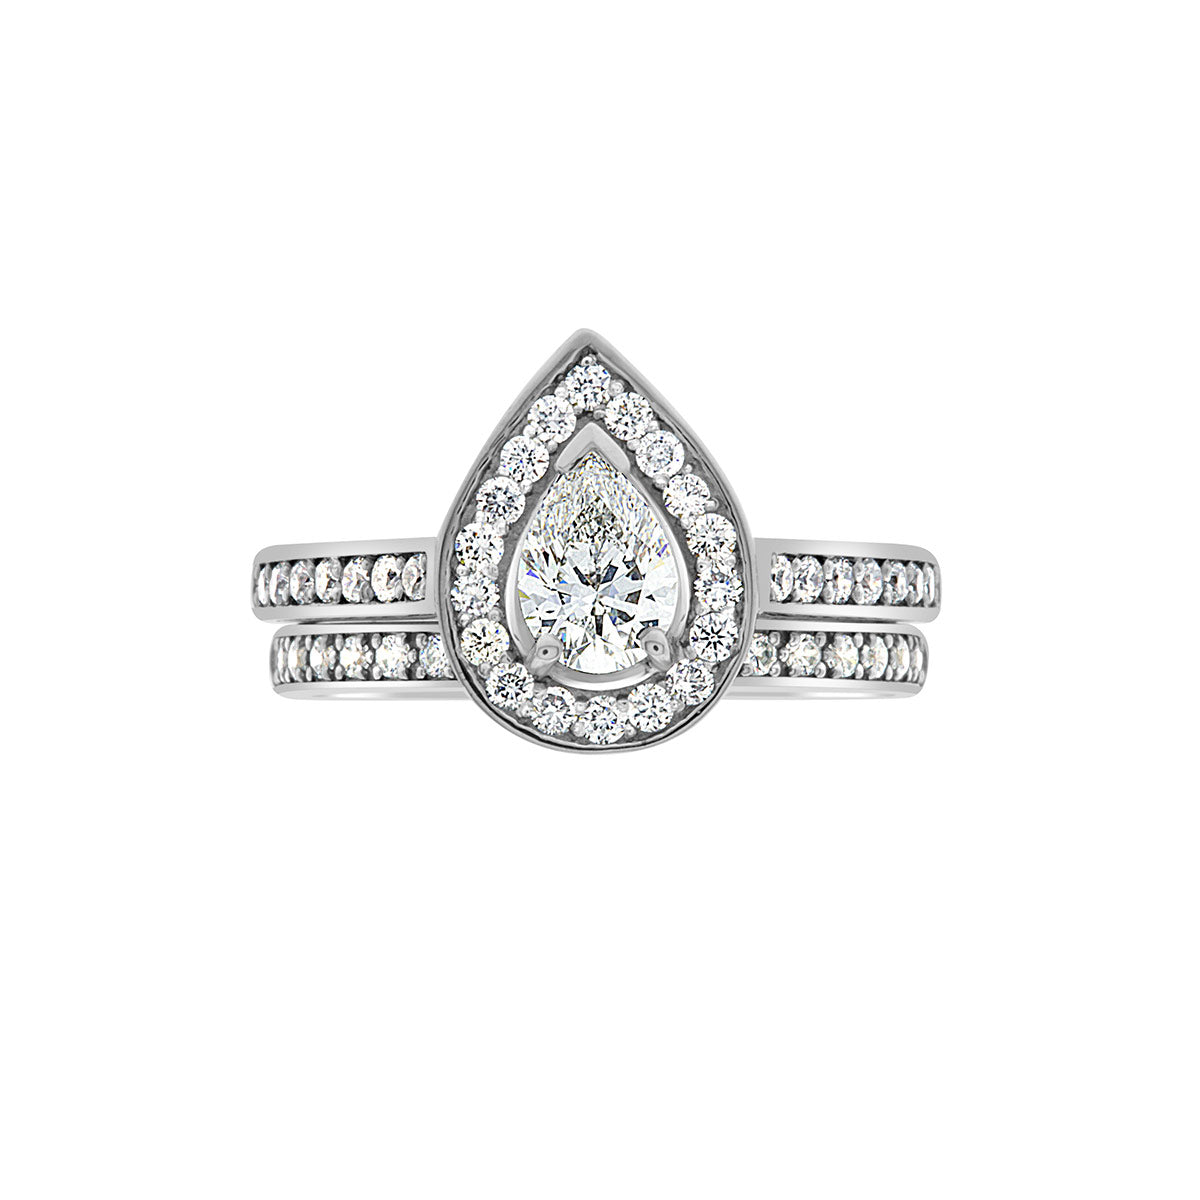 Pear Shaped Halo Engagement Ring in white gold, with a matching diamond set wedding ring, white background